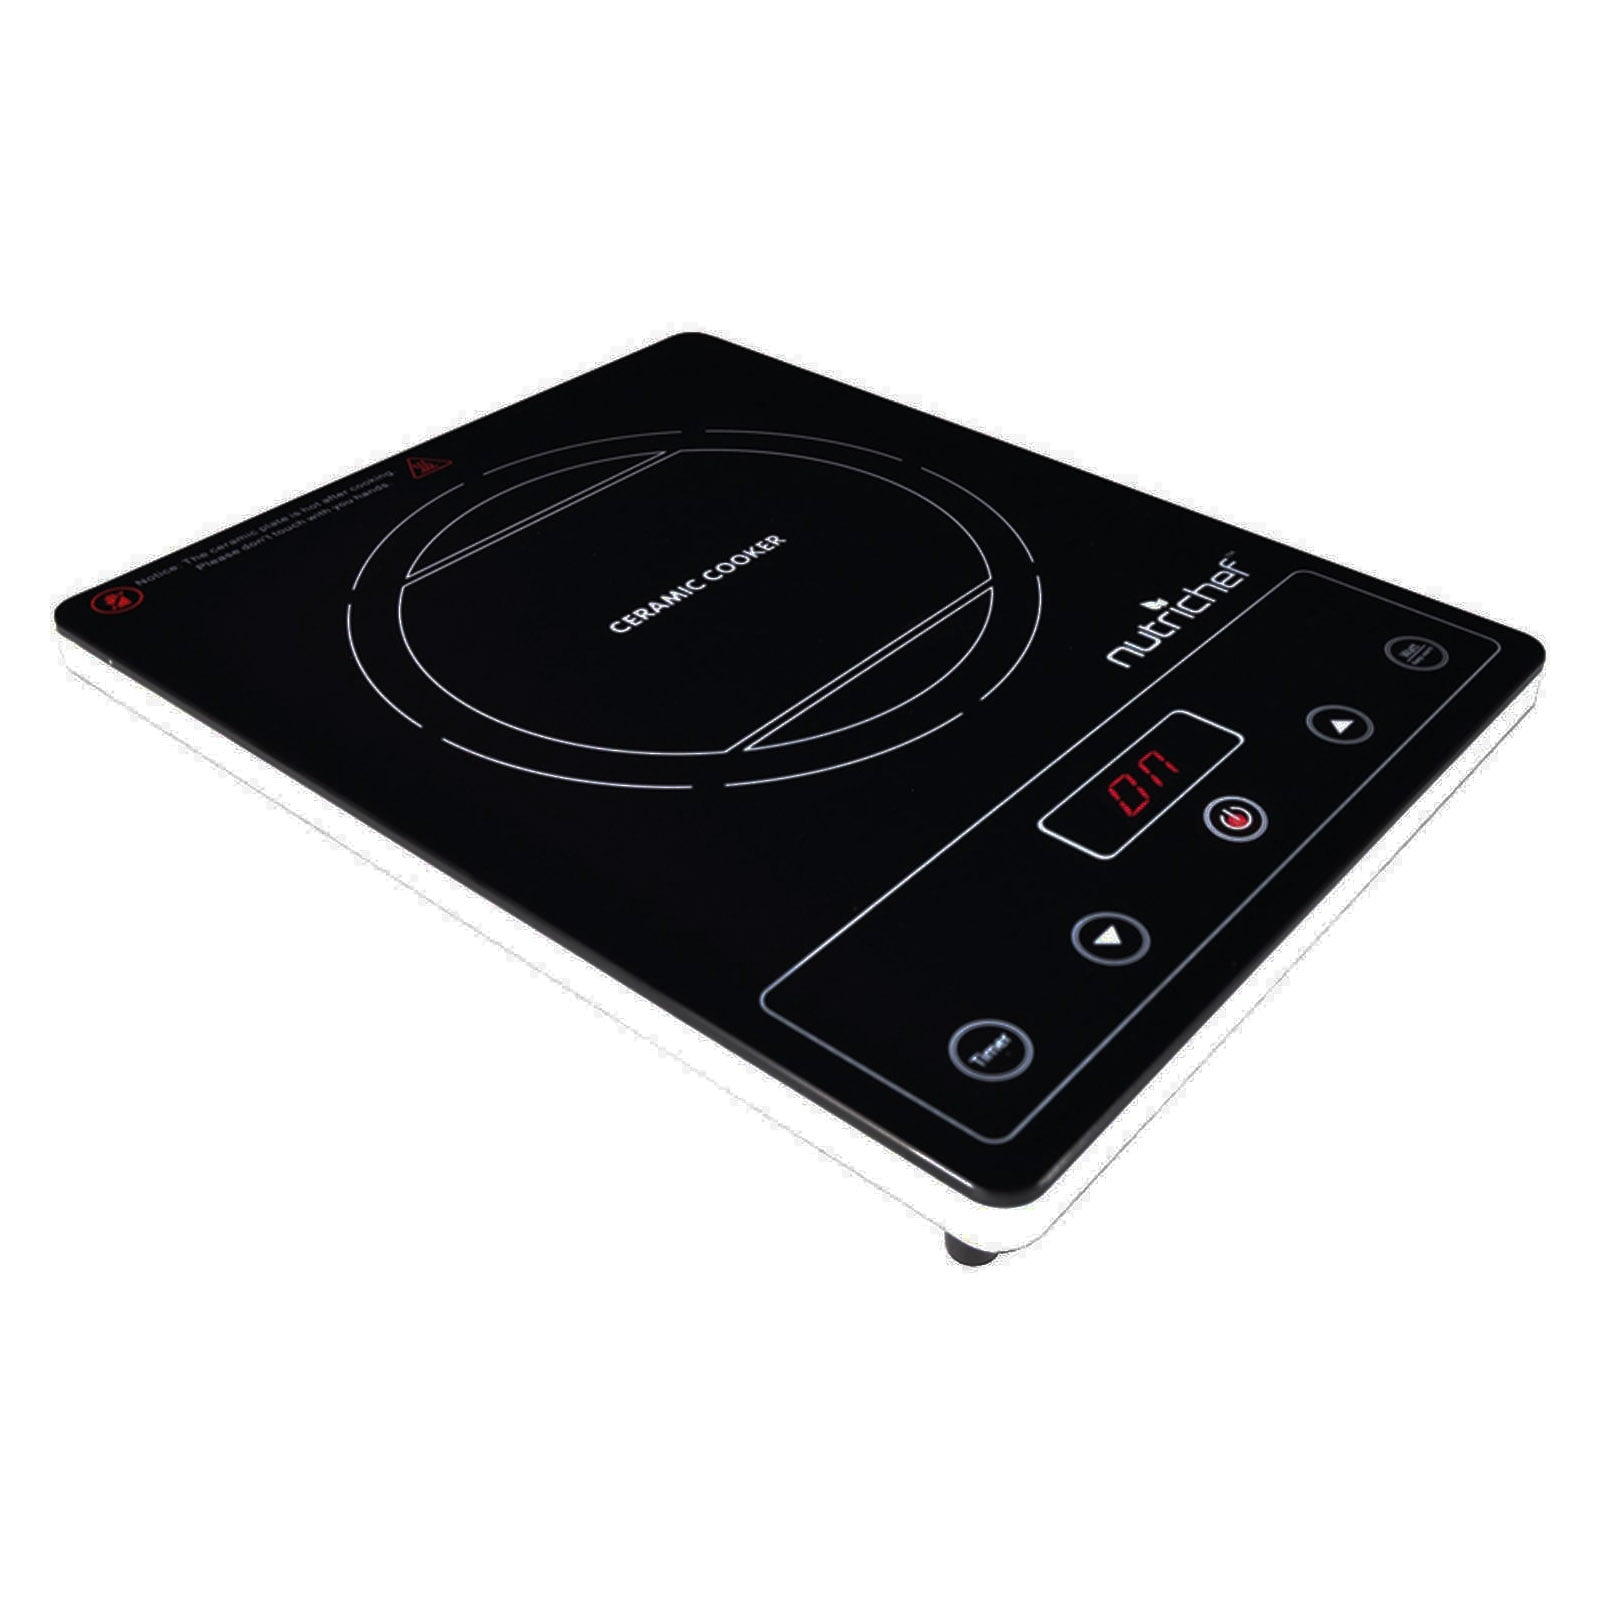 NutriChef Induction Cooktop Electric Countertop Glass Burner Cooker Black 